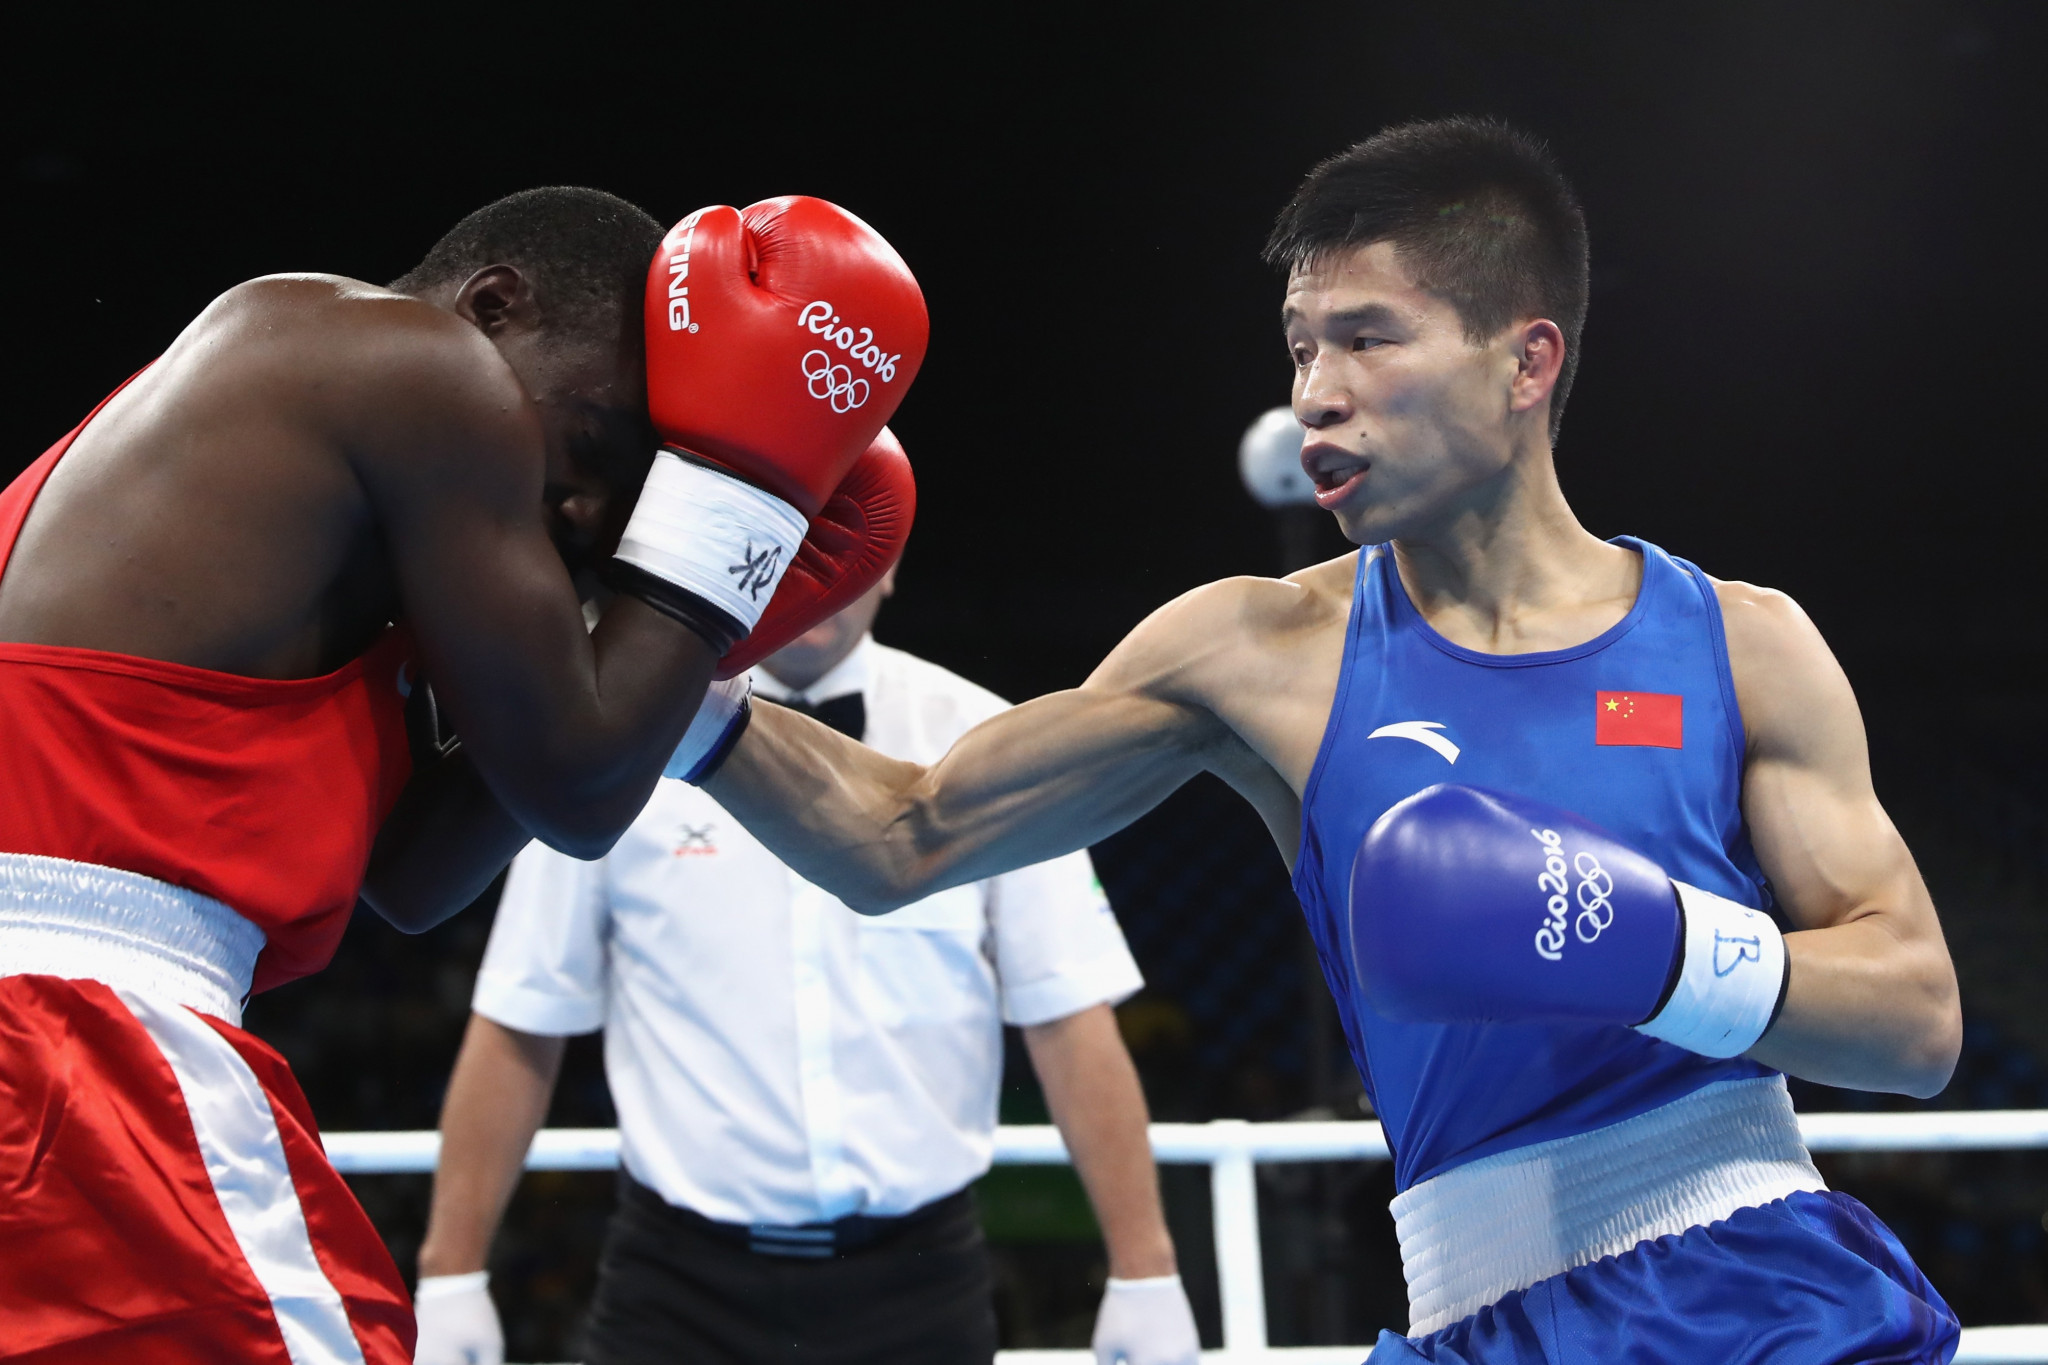 Boxing at the Rio 2016 Olympics was hit by a judging scandal after many suspicious results ©Getty Images